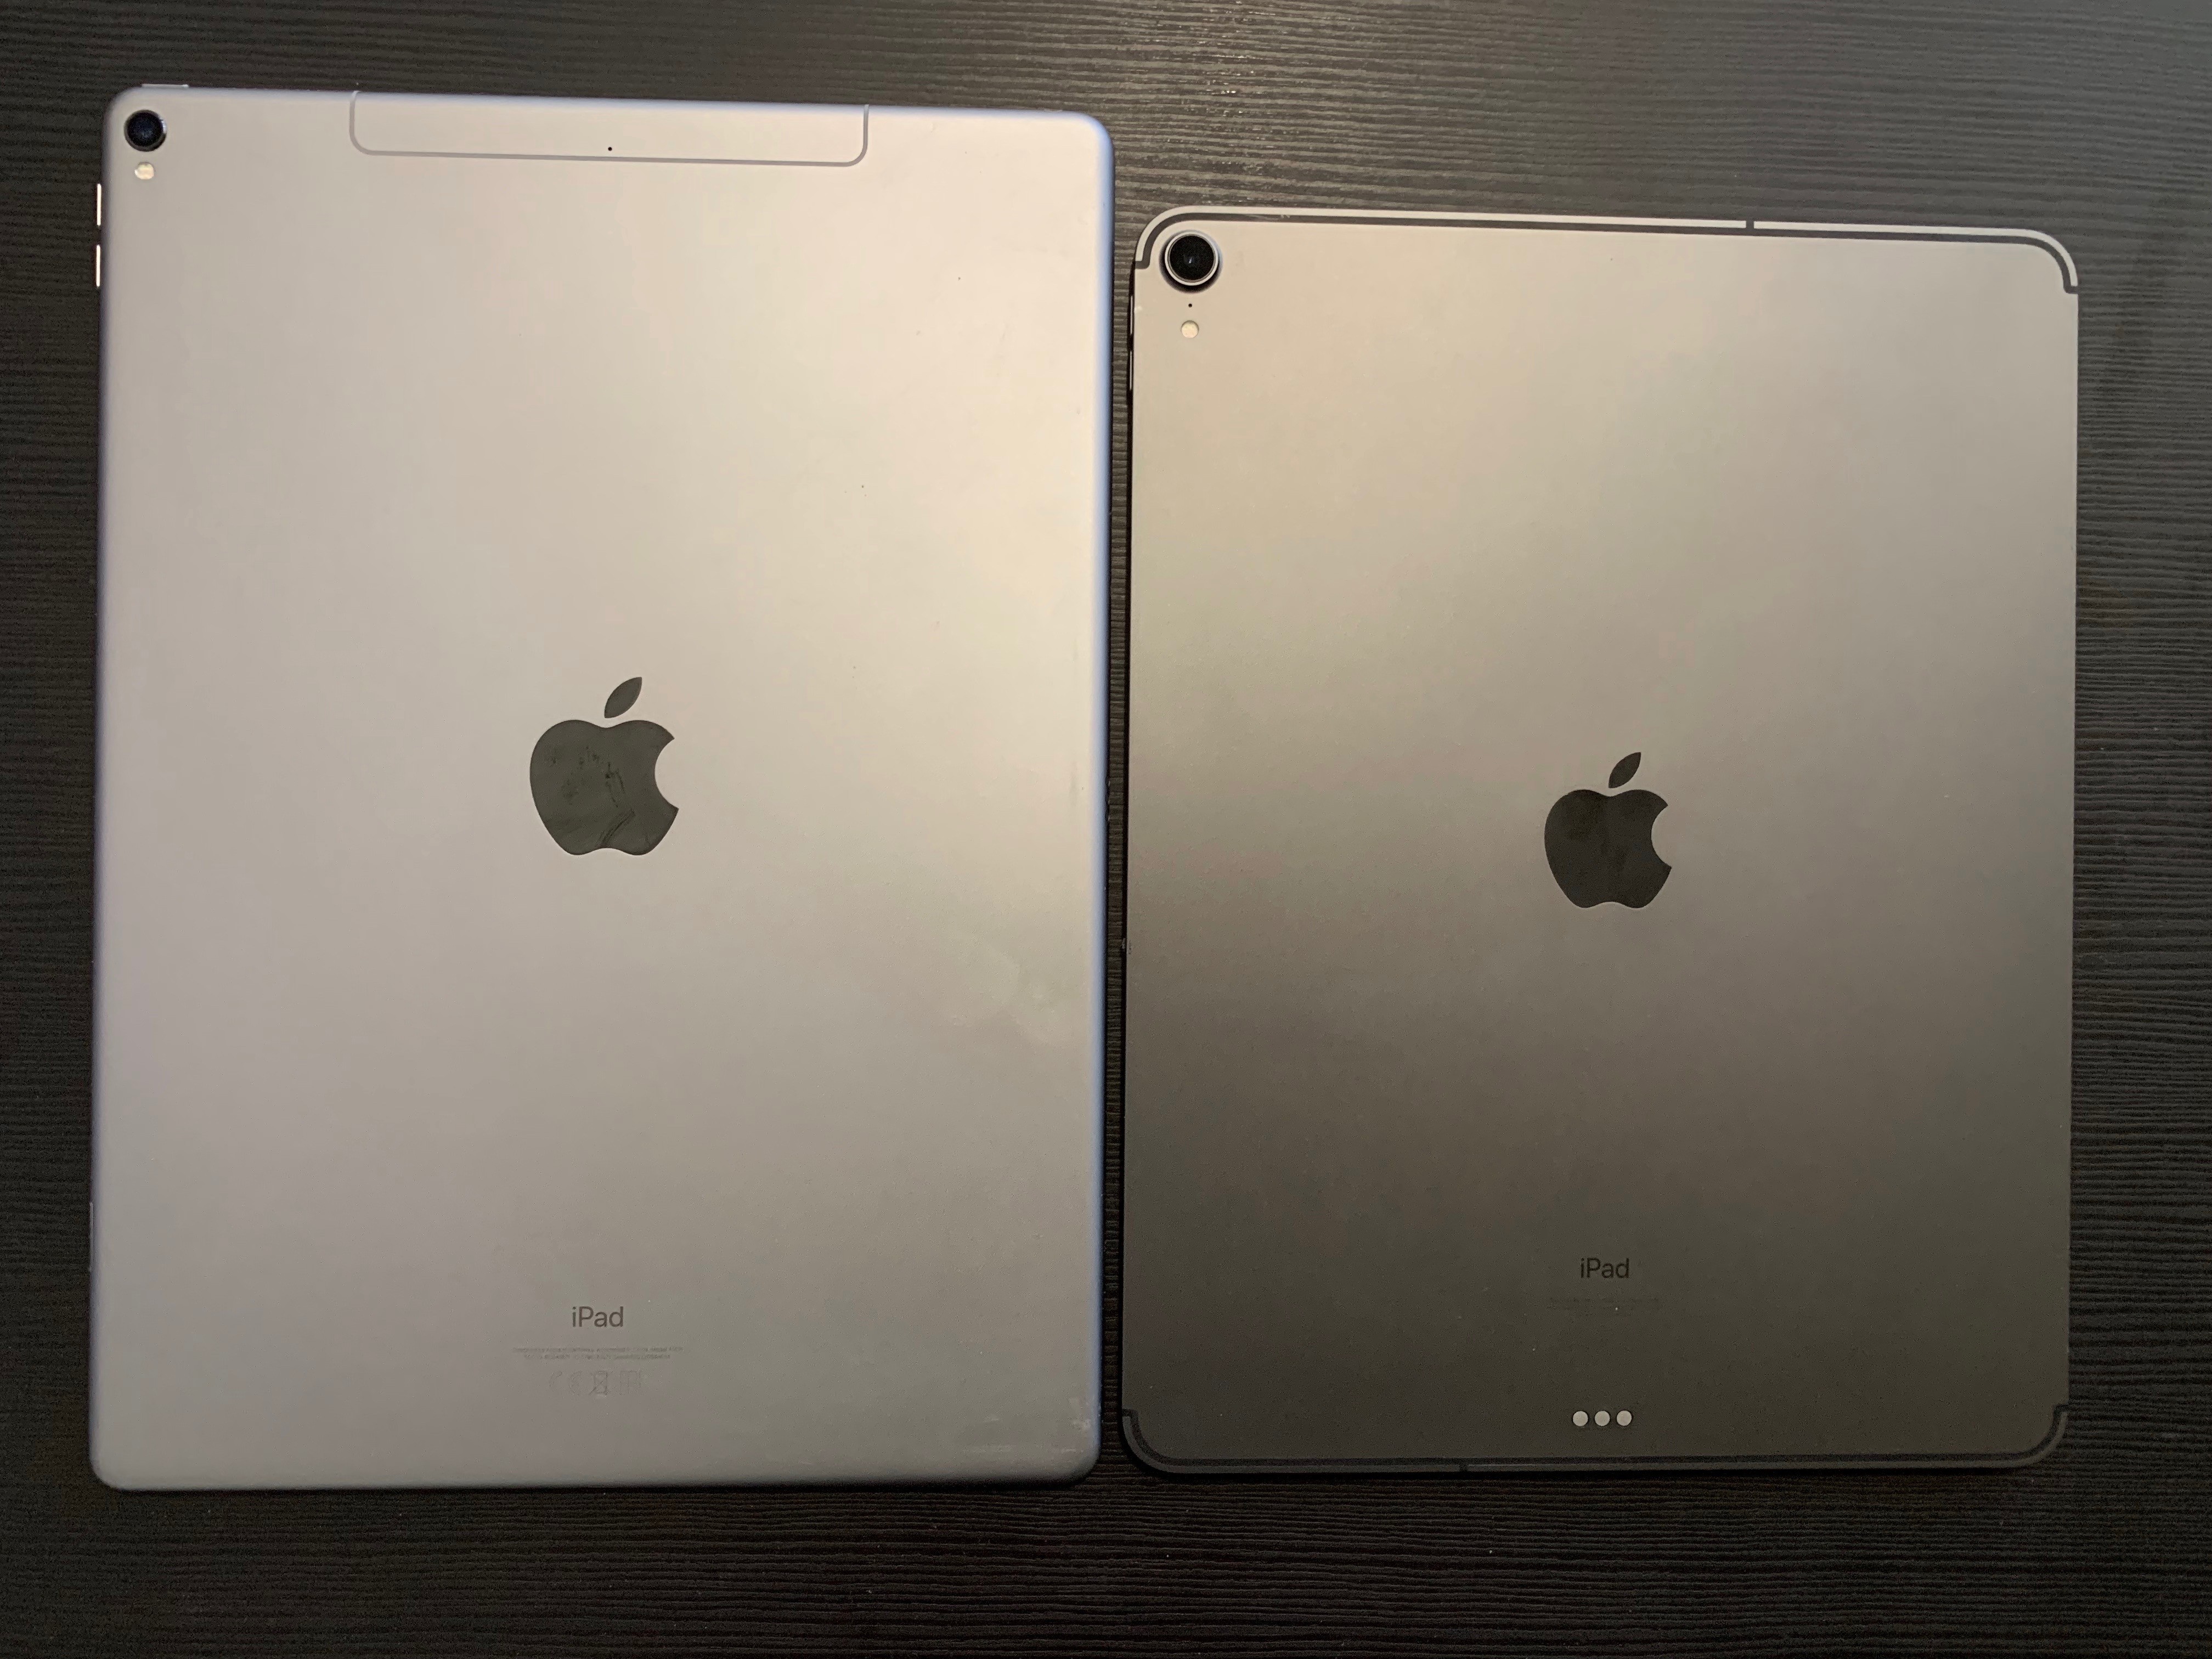 Same display size, same Space Gray color, two different generations.